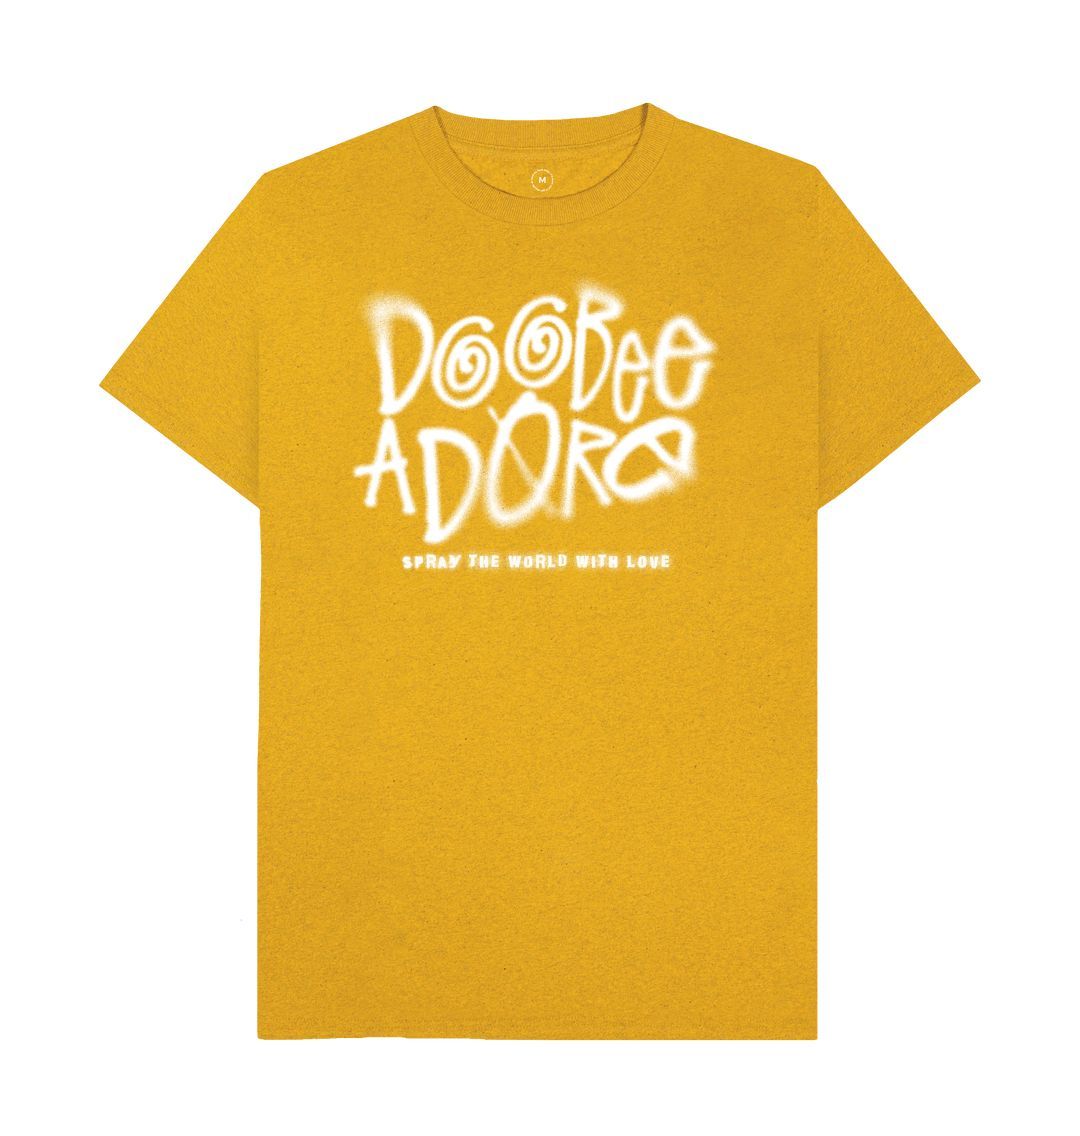 Sunflower Yellow Doobee Adore S.T.W. With Luv Collection T-shirt